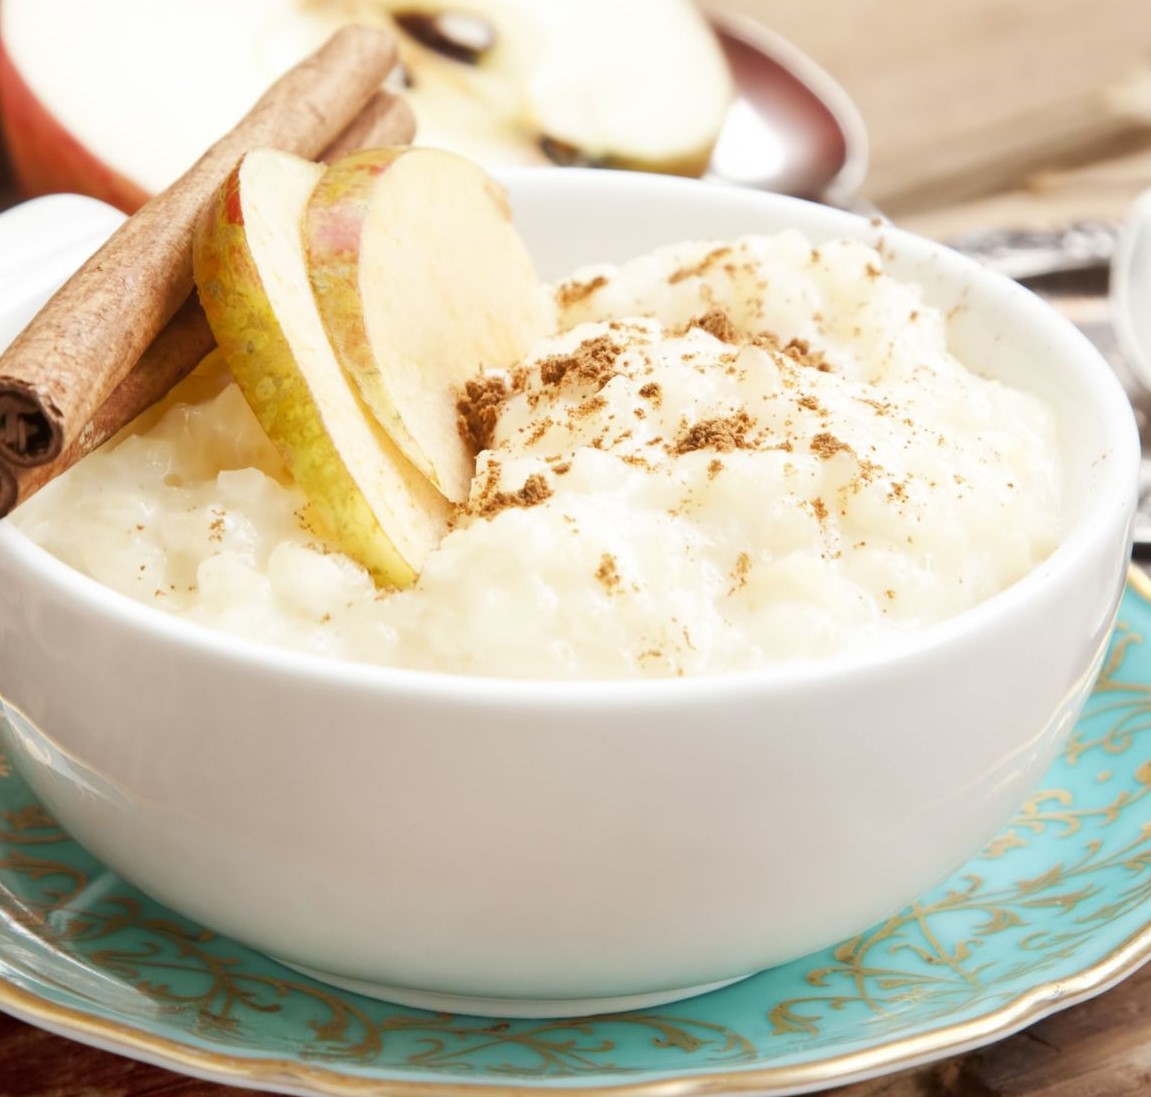 Rice Pudding with Apple Slices and Cinnamon Spice Sticks on Wooden Background